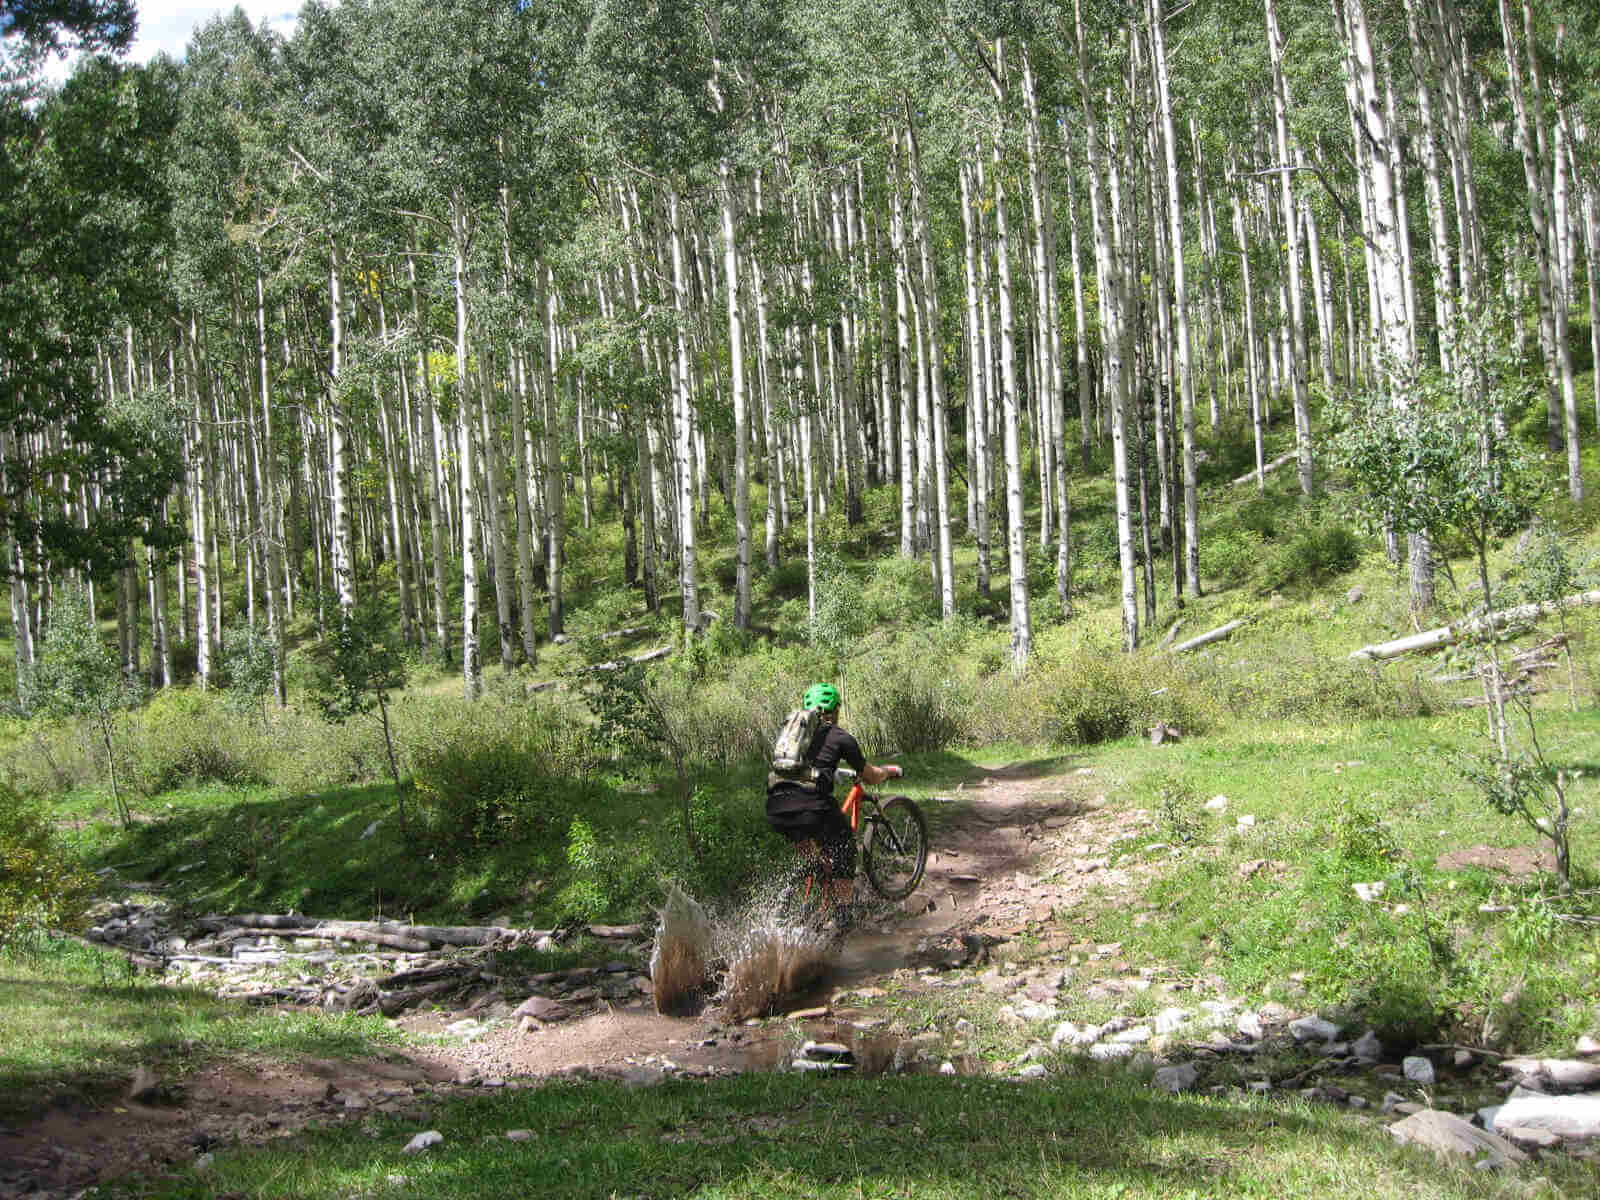 Rear, right side view of a cyclist, riding an orange Surly bike through a small stream, on a rocky trail in a forest